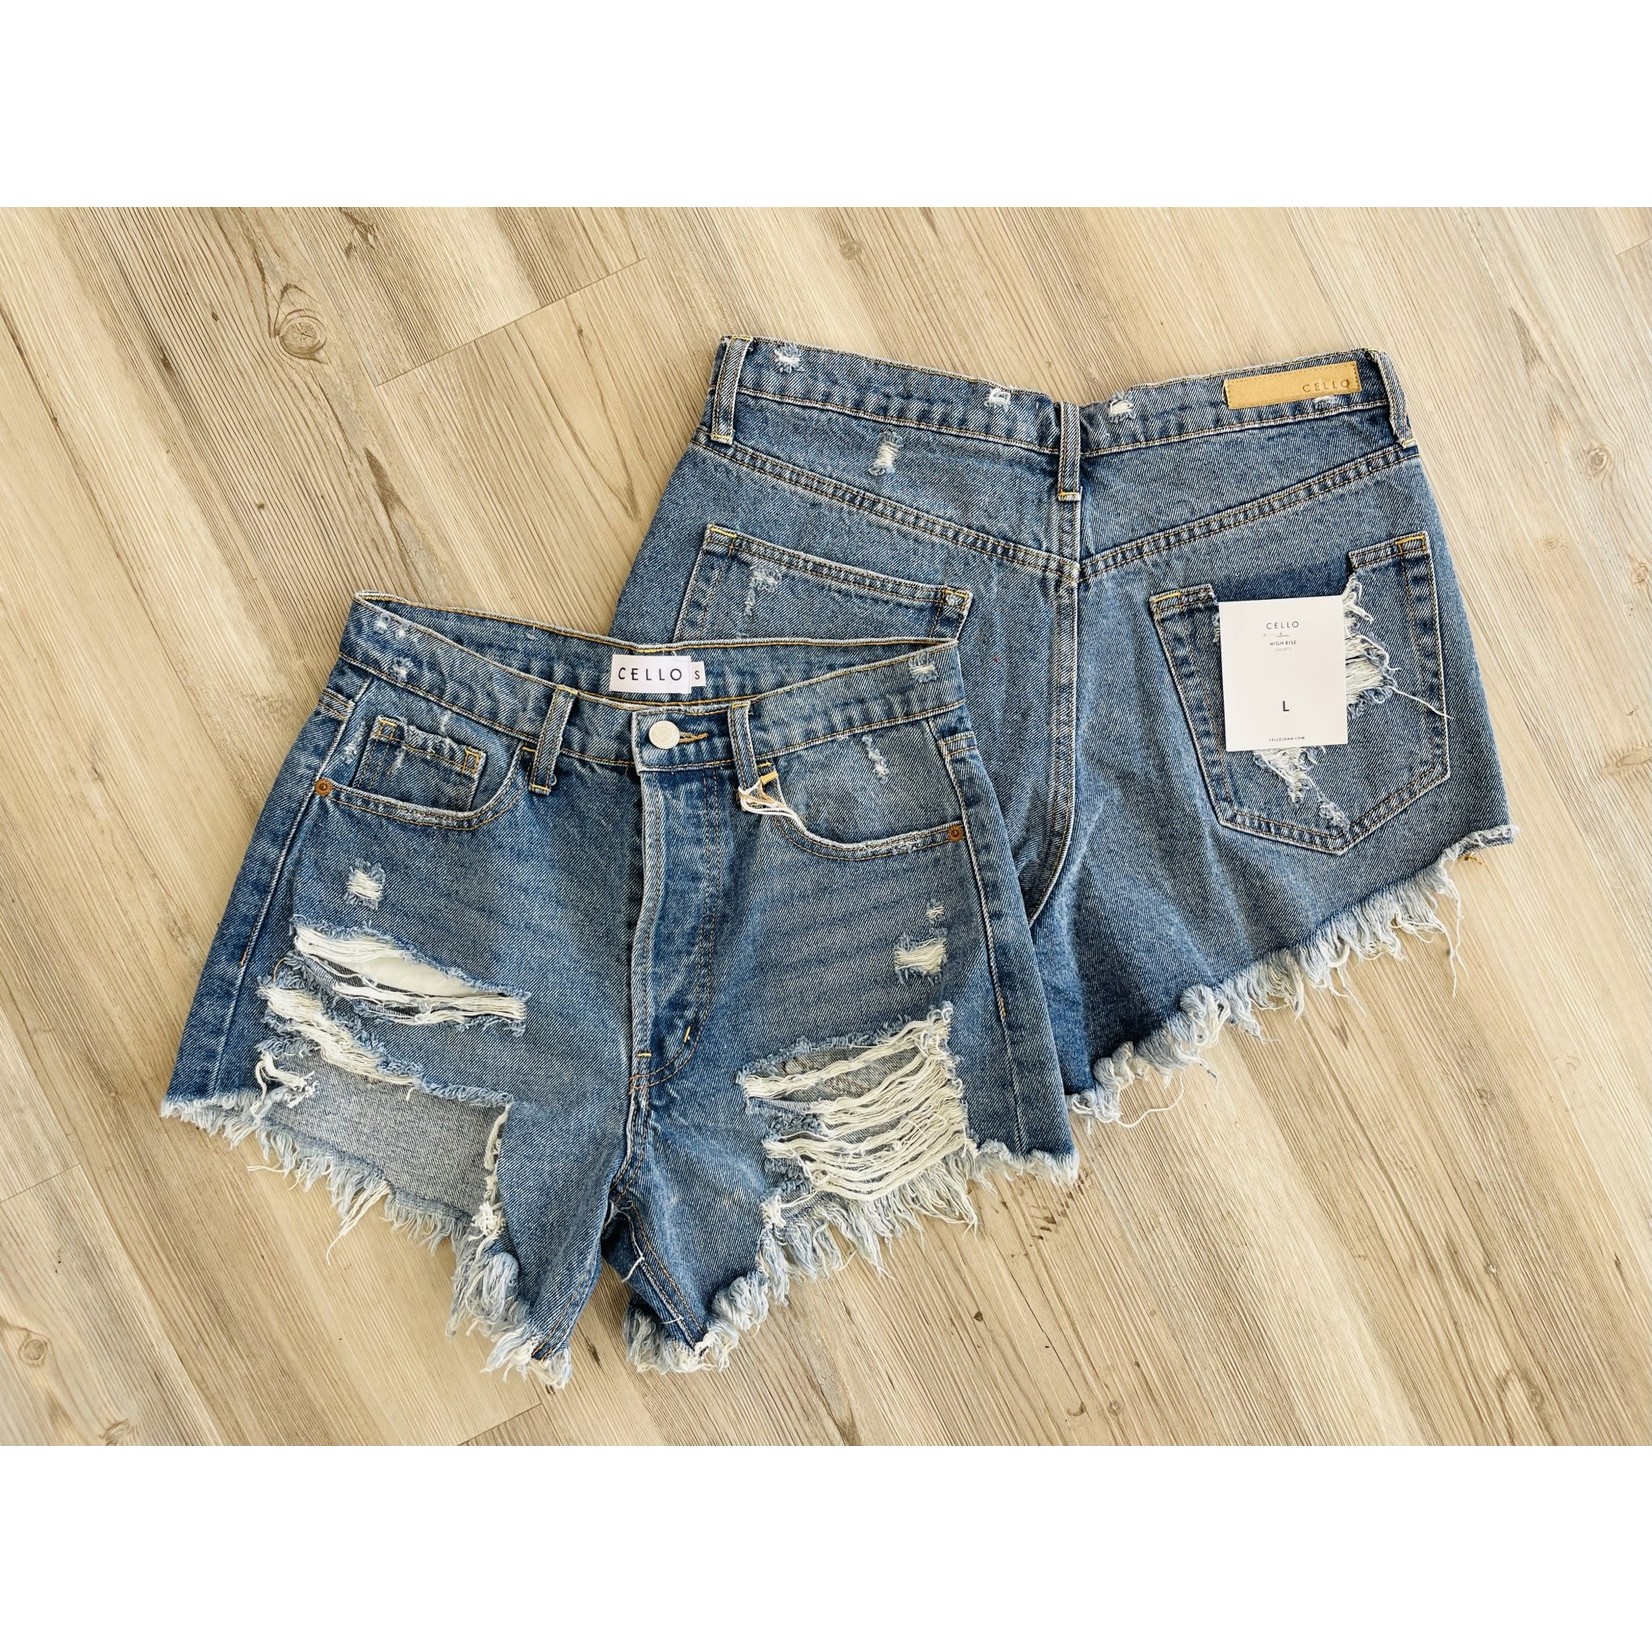 Cello Distressed High Rise Shorts with Button Fly Closure